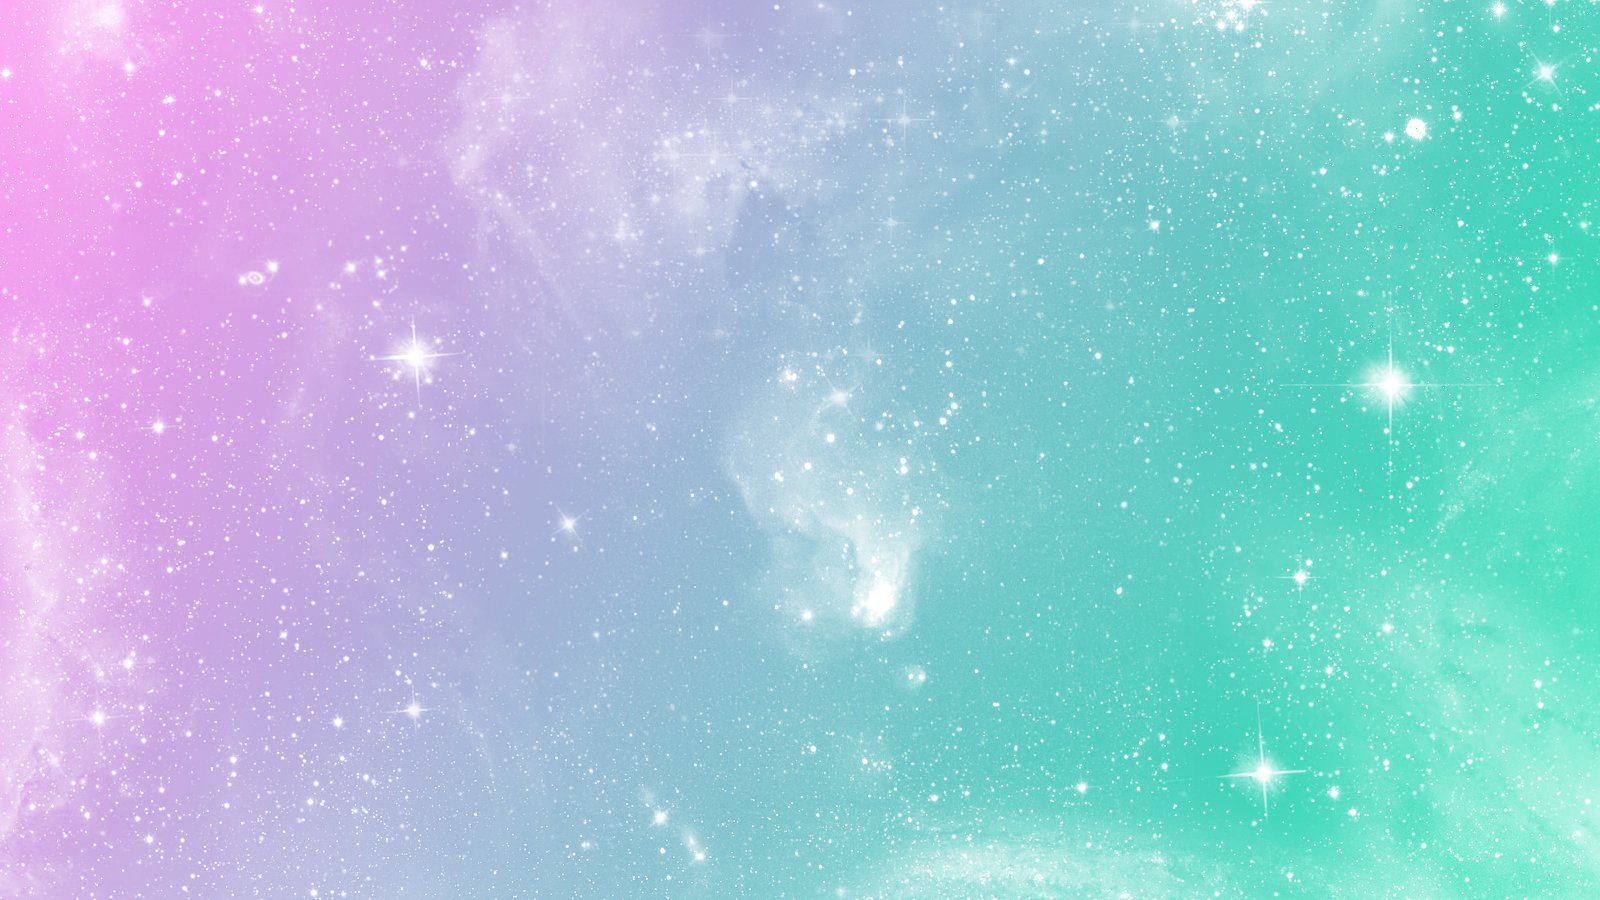 Pastel Galaxy Backgrounds Backgrounds hipster